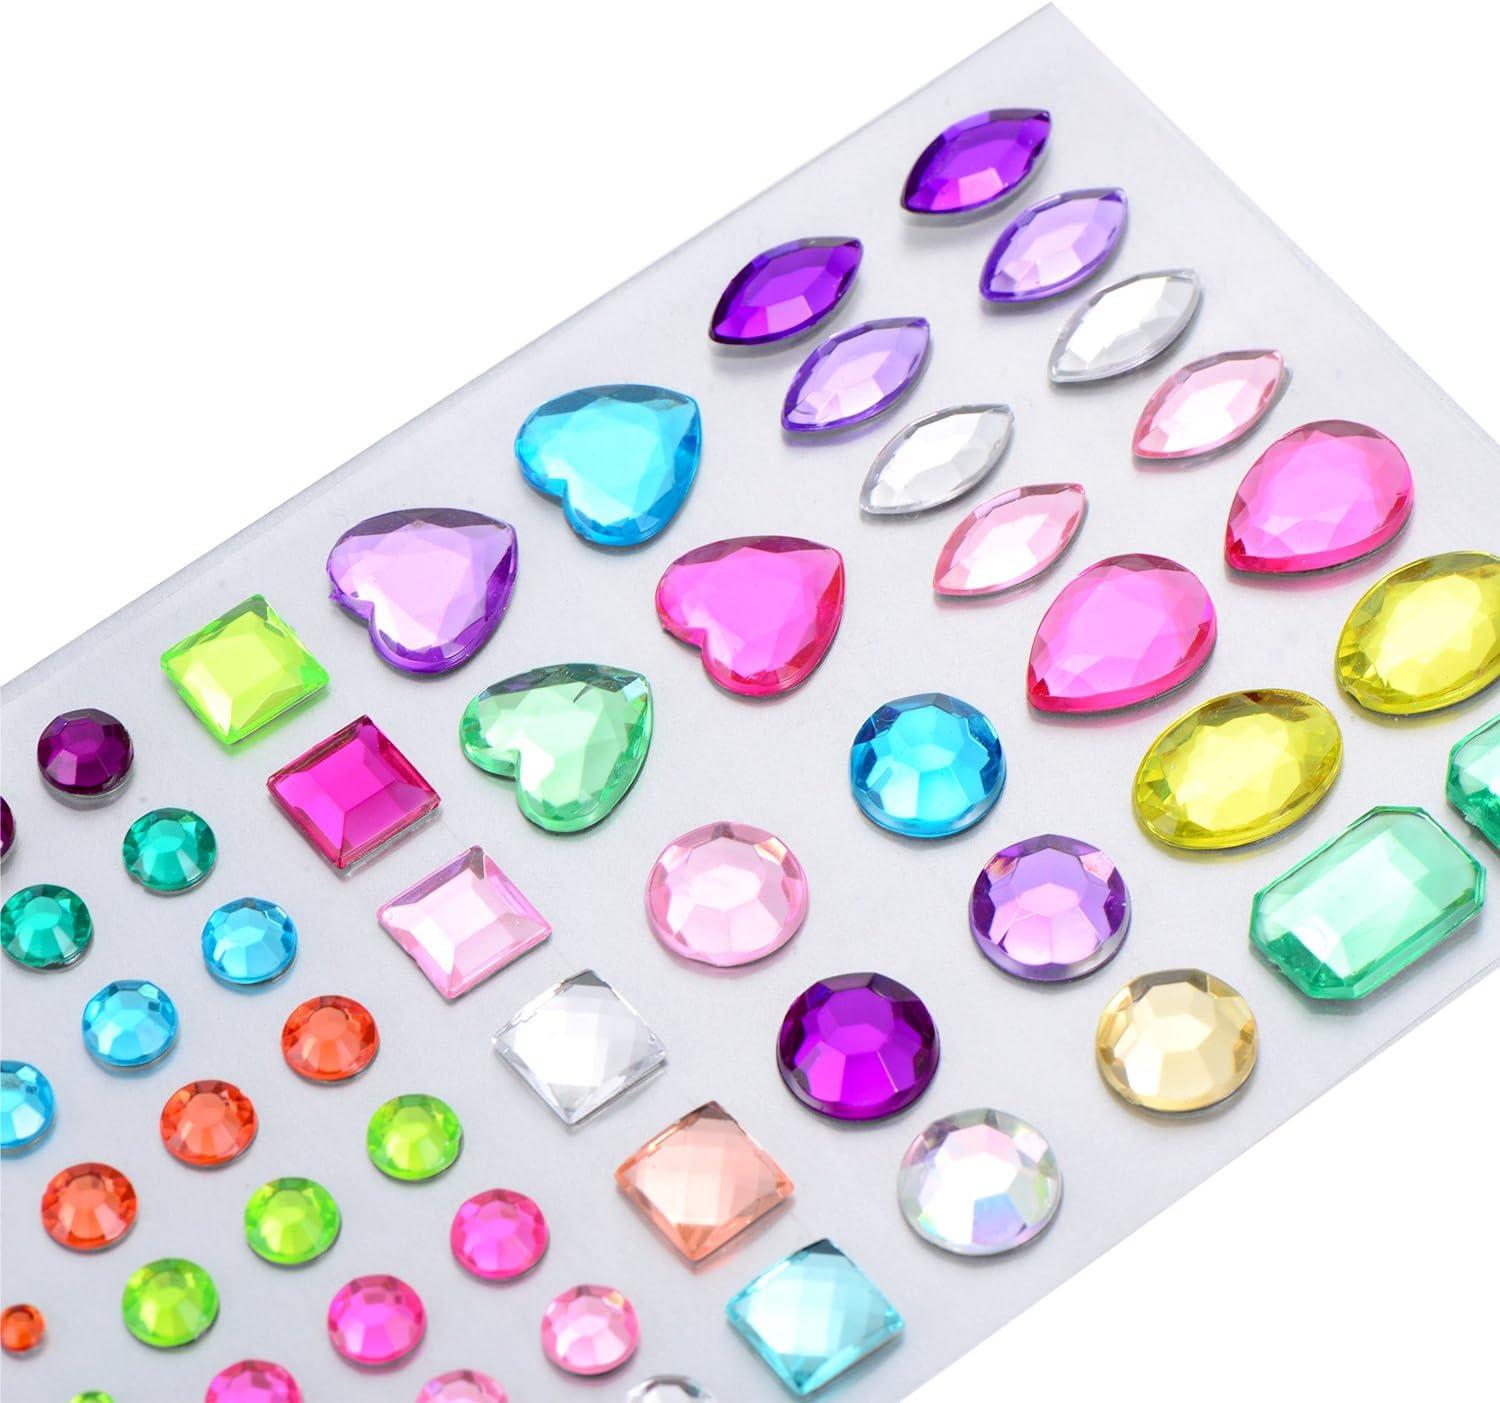  2774pcs Gem Stickers Jewels for Crafts - Self Adhesive